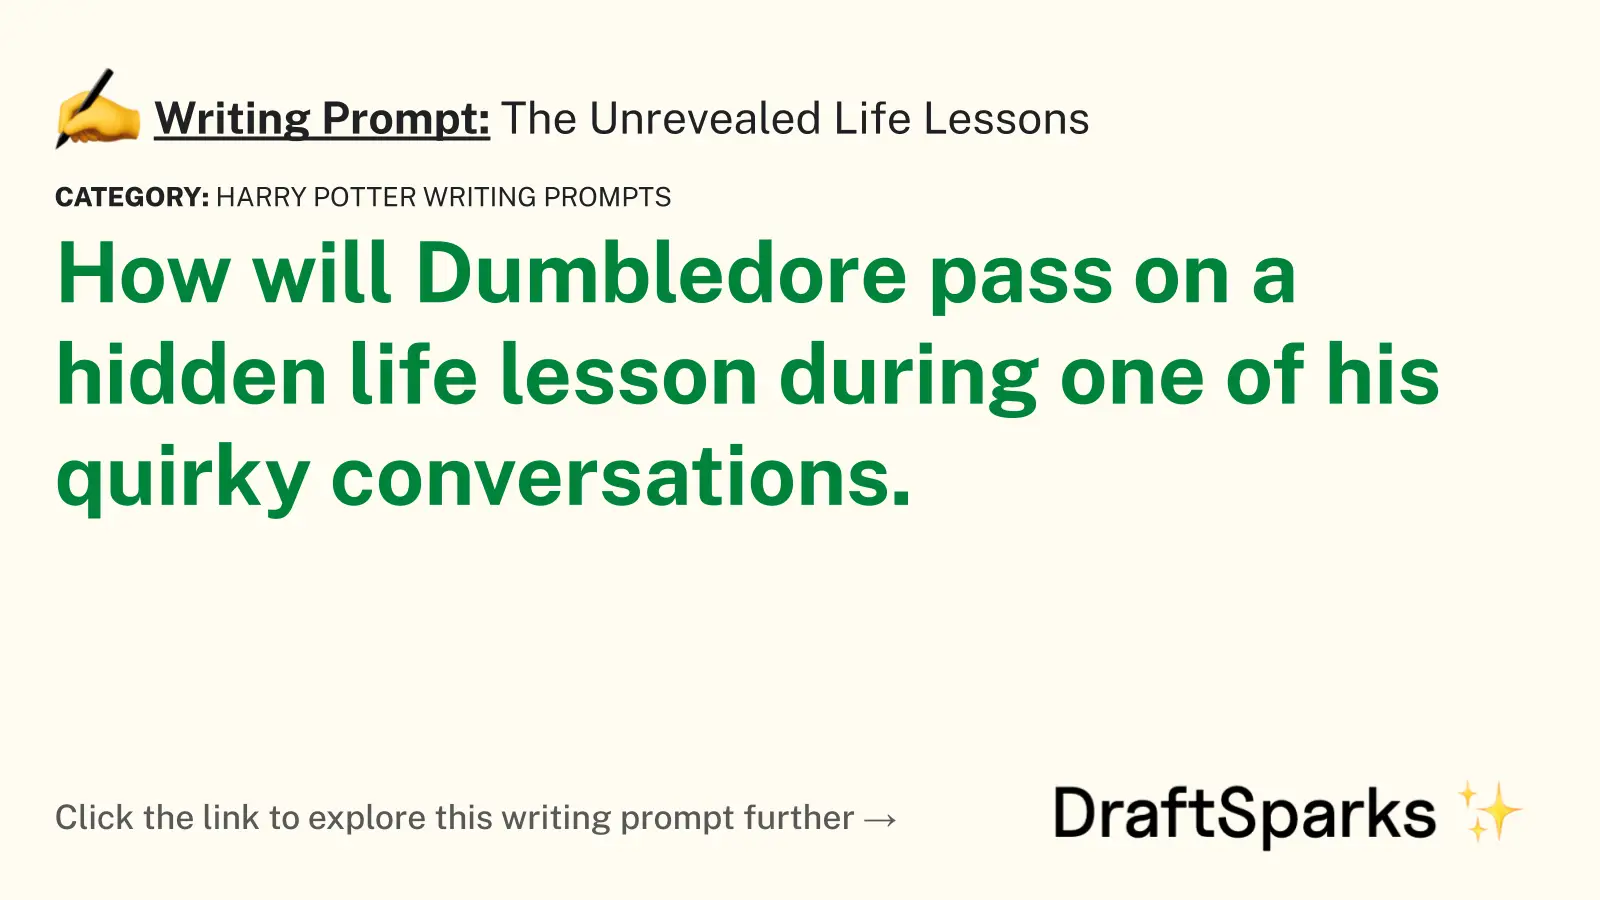 The Unrevealed Life Lessons